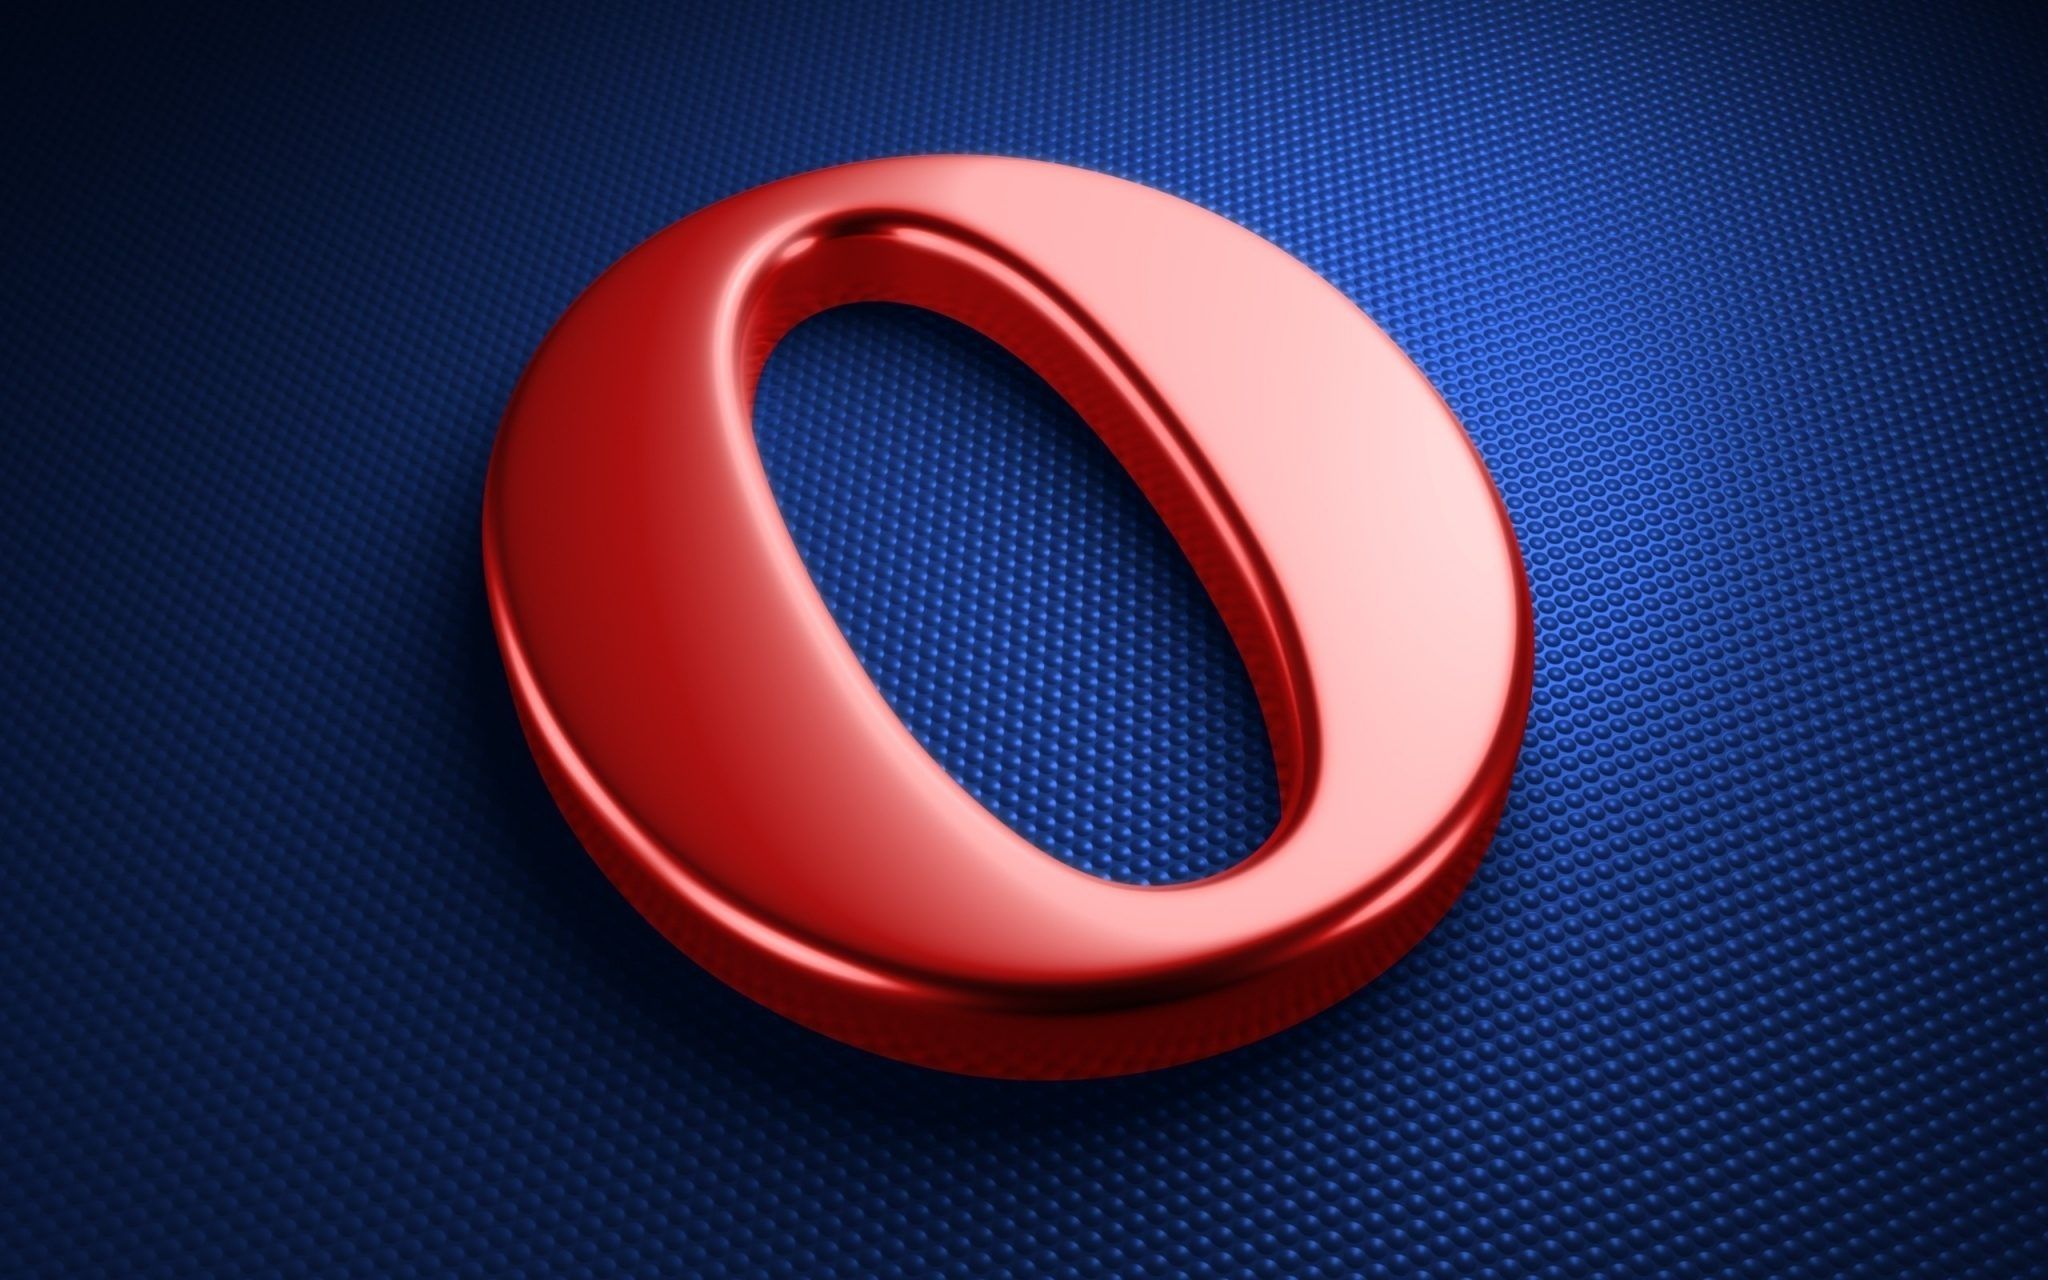 How To Change The Speed Dial Theme In Opera Browser